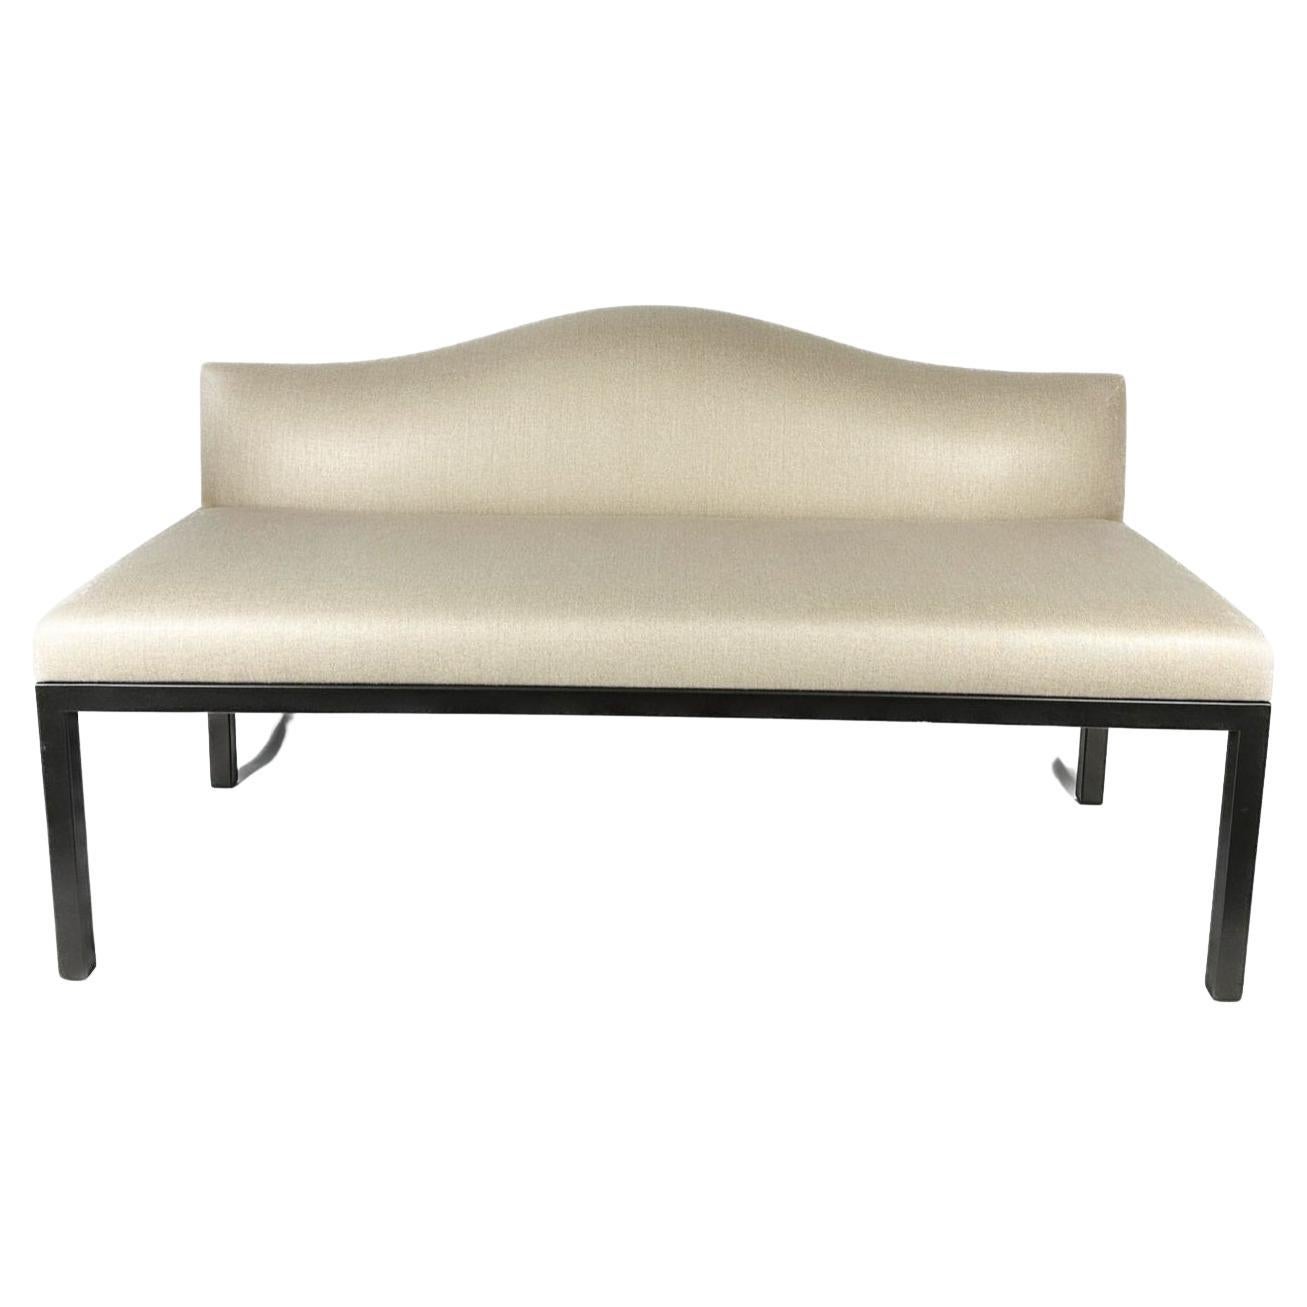 Christian LIAIGRE  Doge" bench seat.